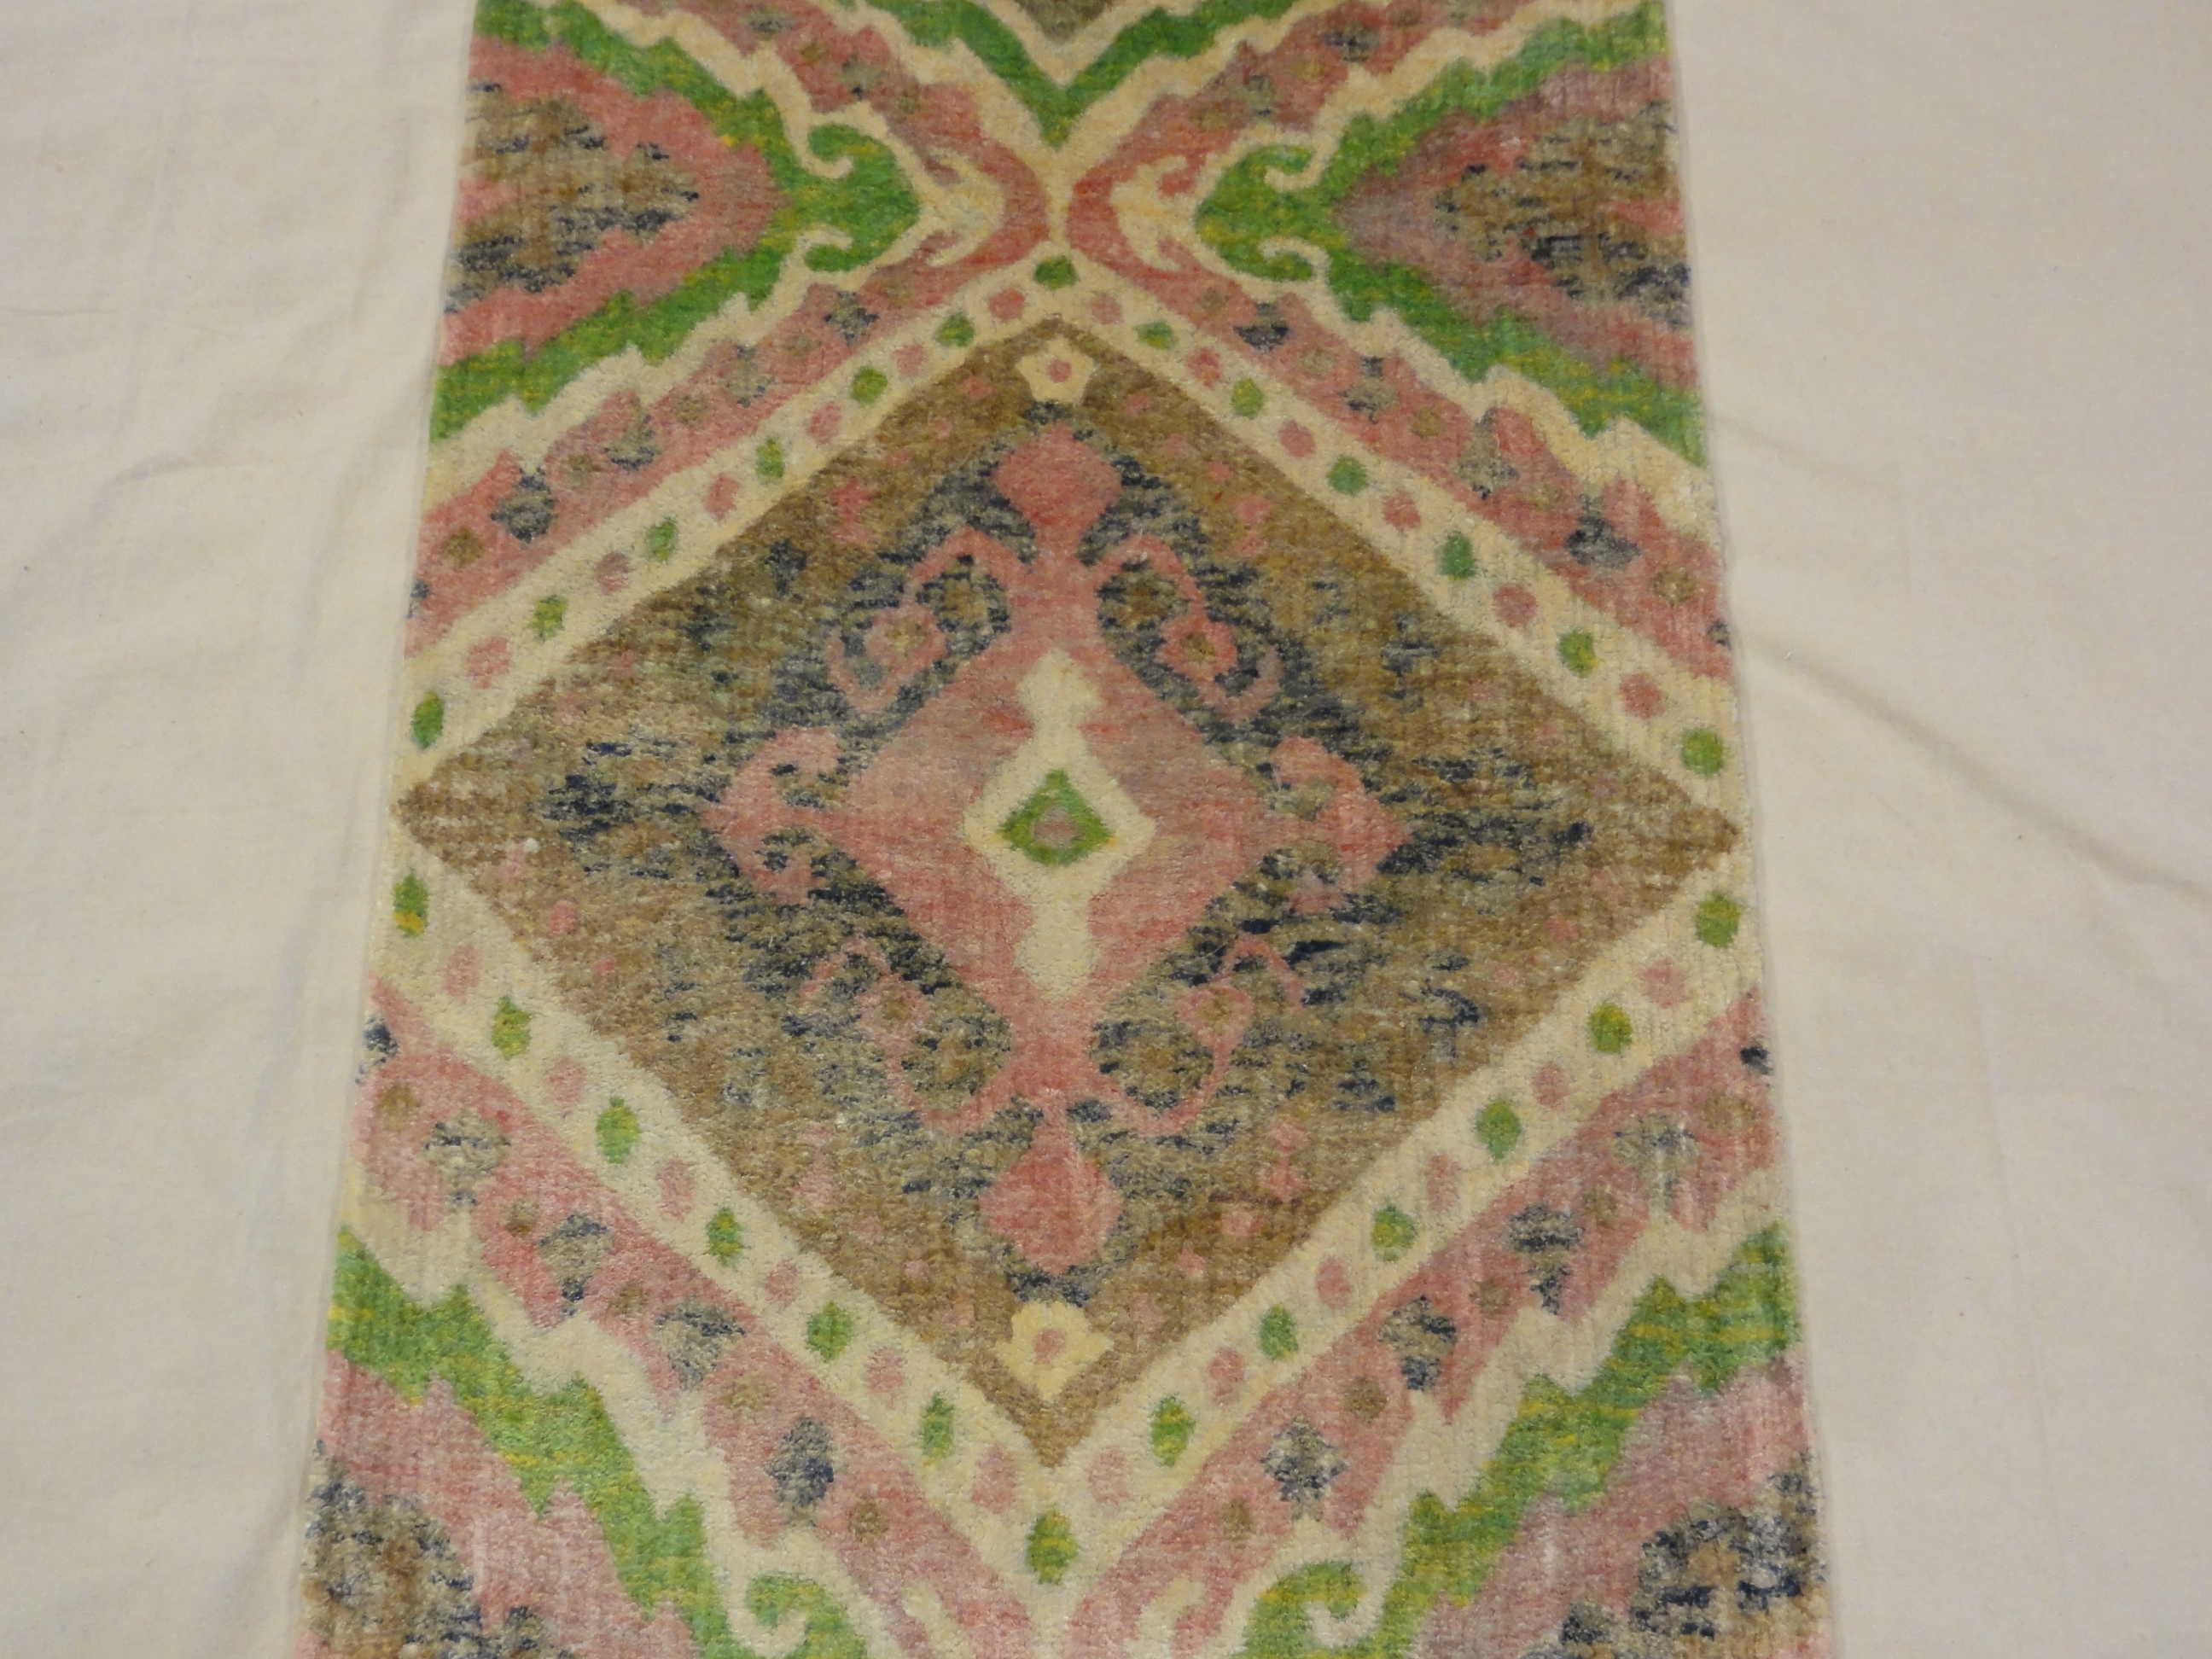 Lovely Patterned Green and Pink Runner. A piece of genuine woven authentic carpet art sold by Santa Barbara Design Center, Rugs and More.